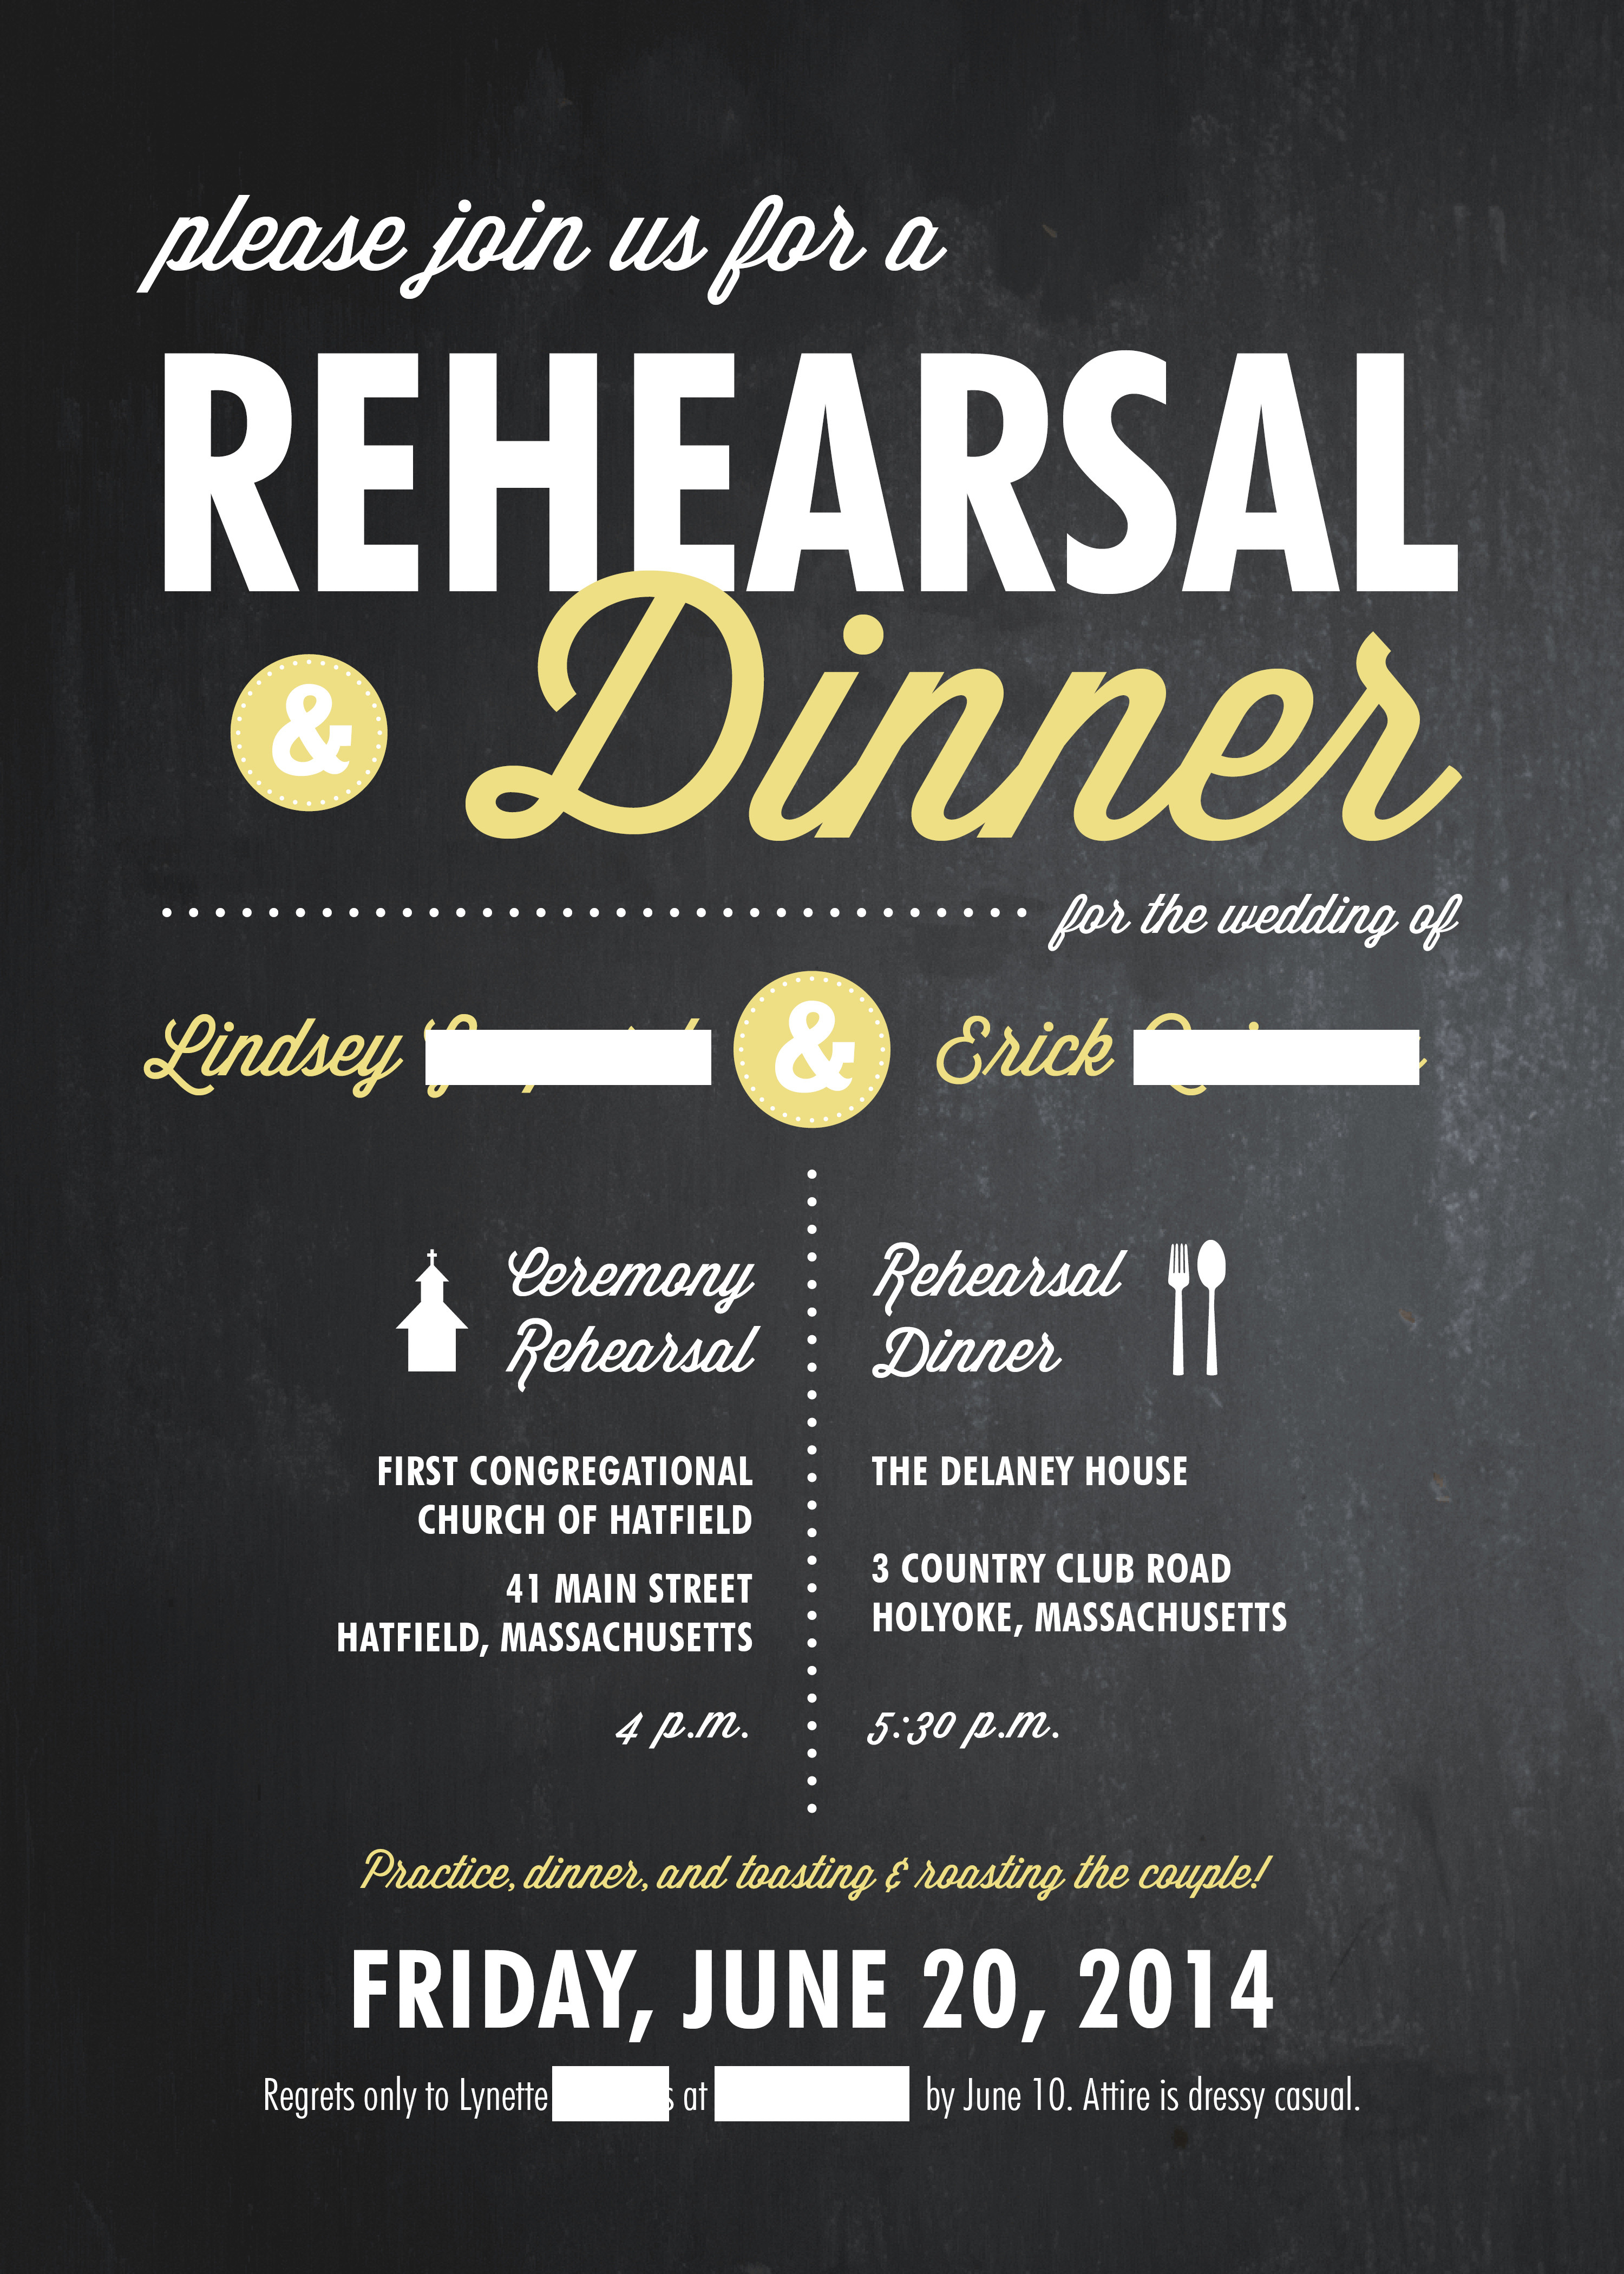 Who To Invite To Rehearsal Dinner
 Who To Invite To Rehearsal Dinner